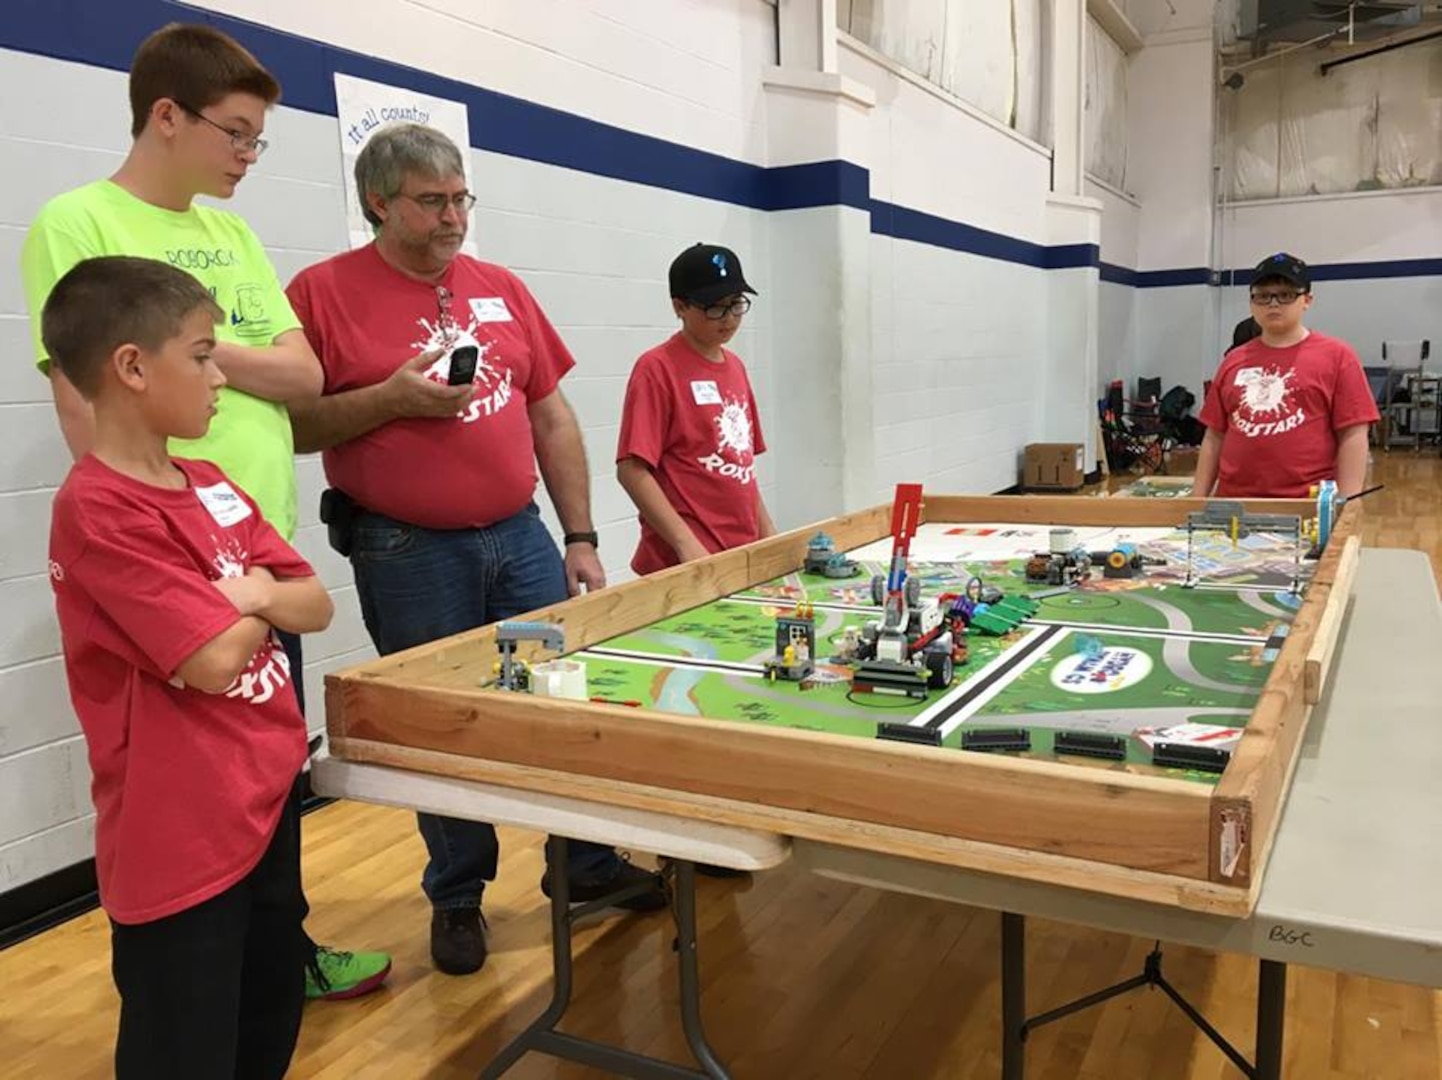 STEM students, parents and NSWC Crane volunteer coaches participated and volunteered at a FIRST Lego League (FLL) competition on Nov. 18 at the Lawrence County Boys and Girls Club as 130 students competed for a chance to move on to the State Tournament scheduled for Dec. 2 at the University of Southern Indiana.